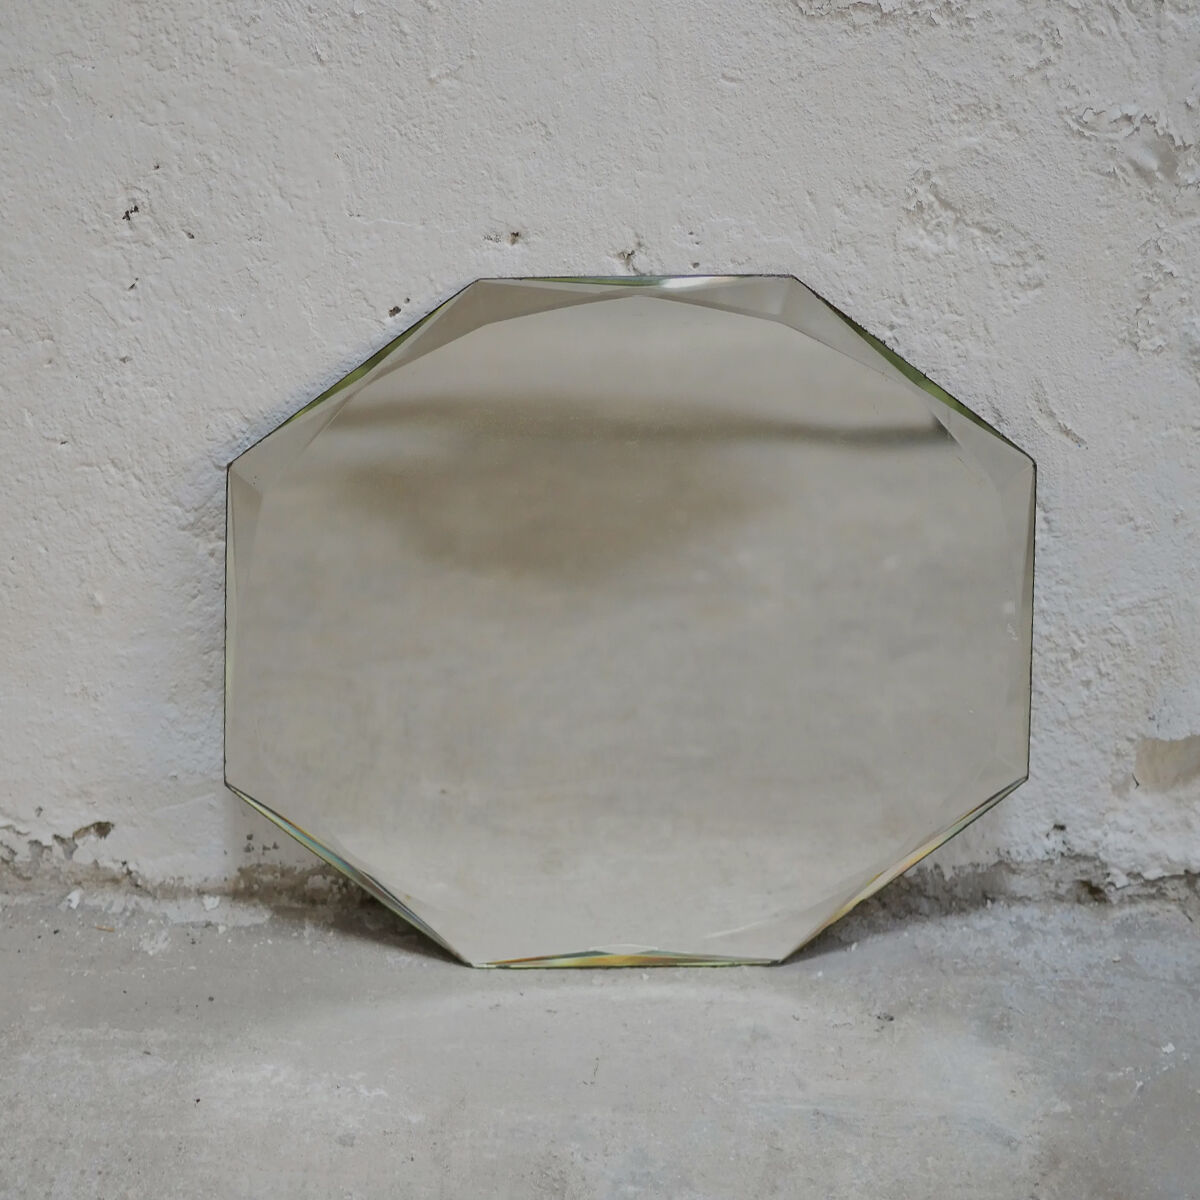 SEE OUR BEVELED MIRRORS FOR LESS THAN 100 EUROS